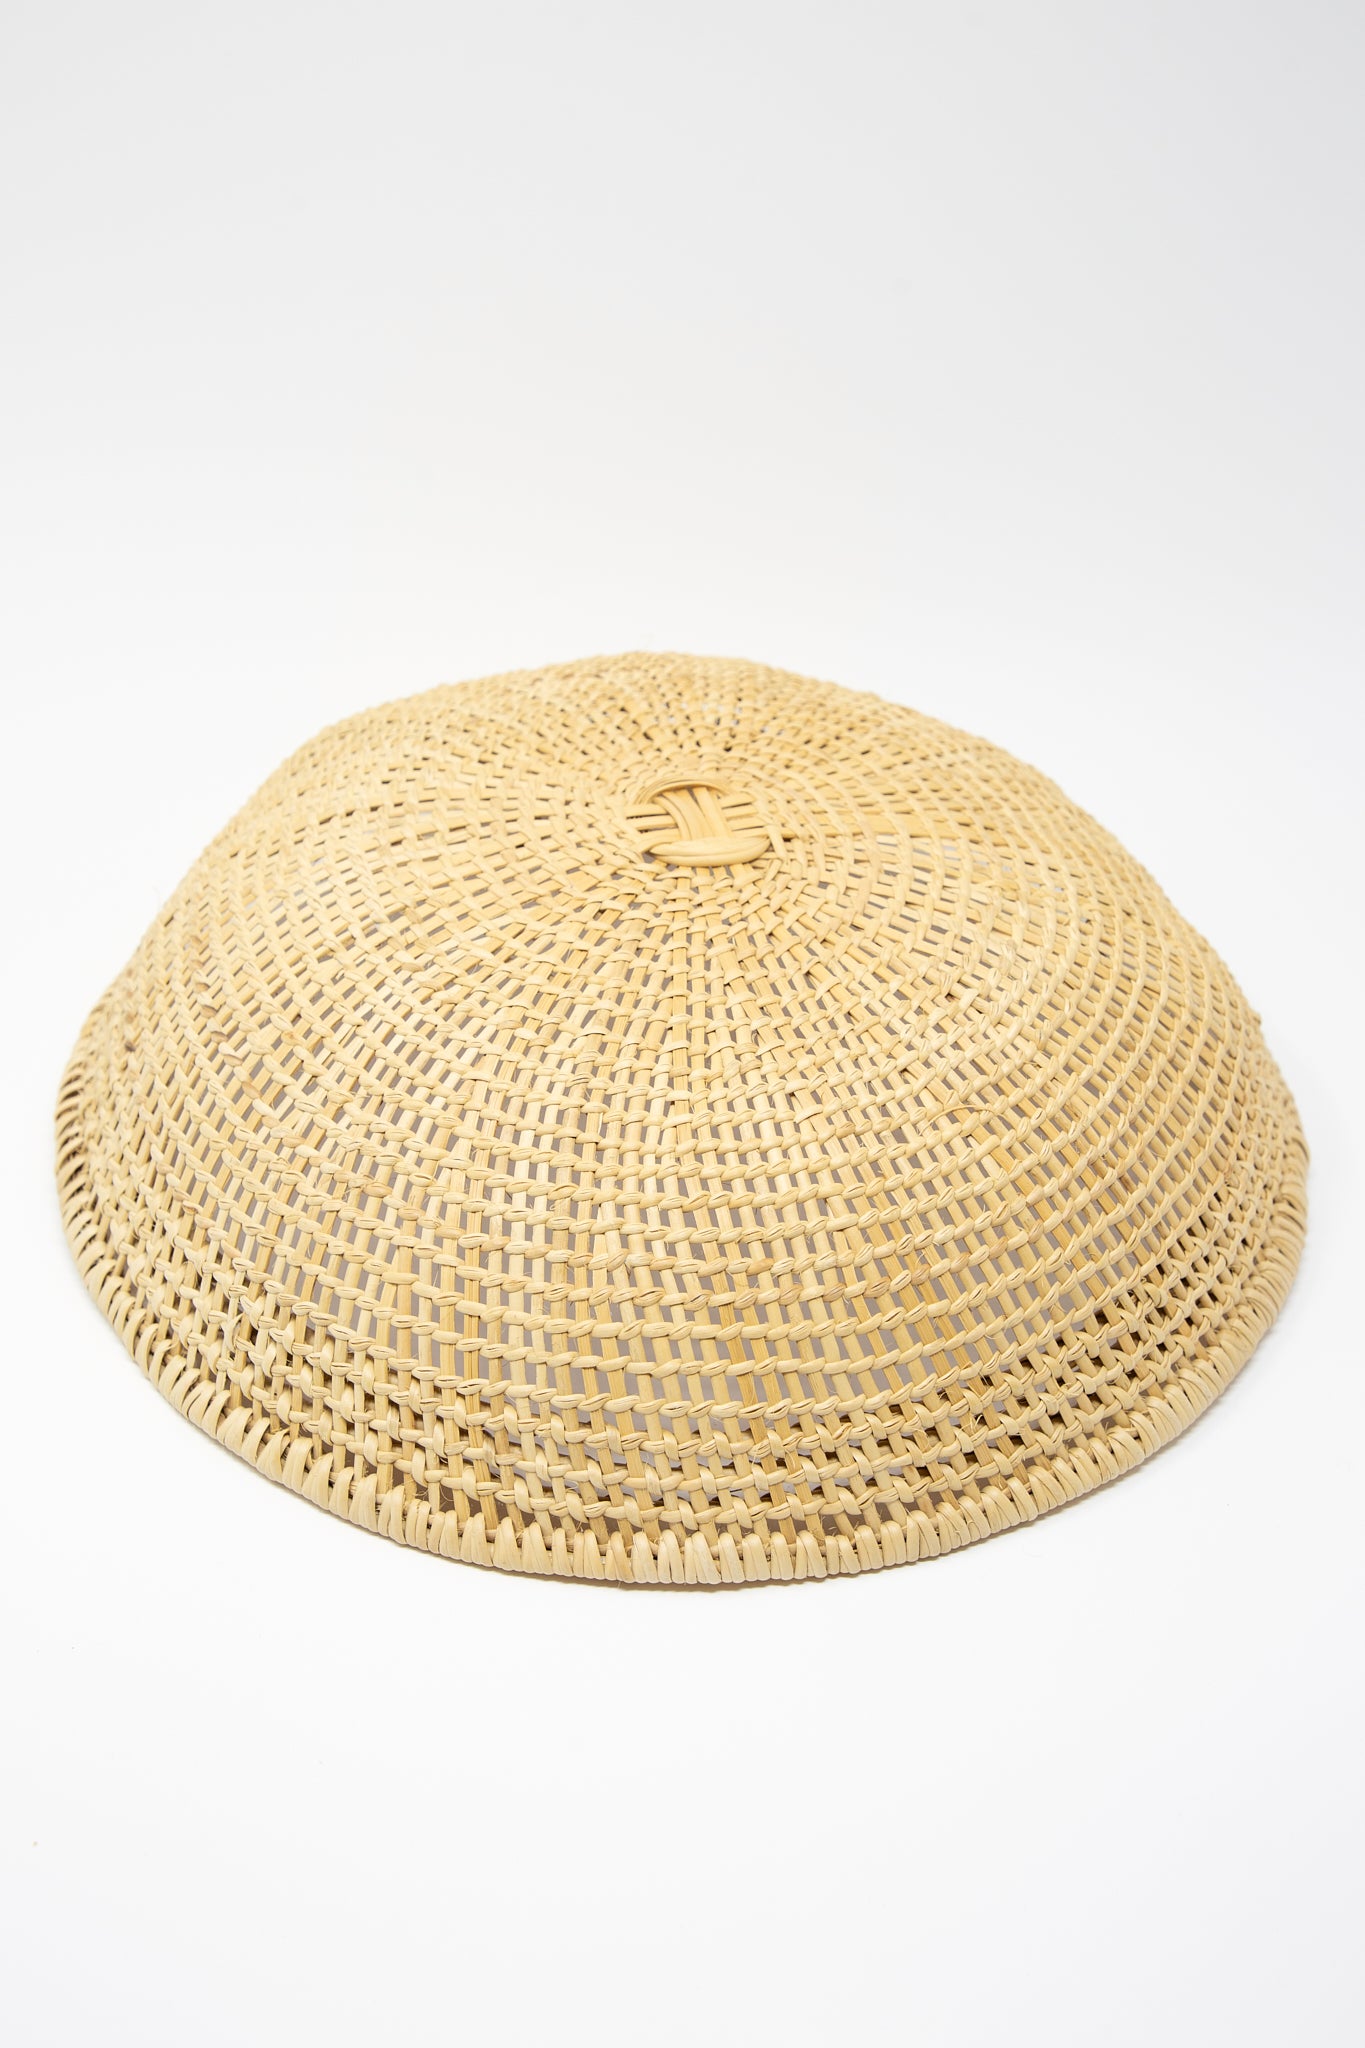 An artisan-crafted round woven Medium Avia Pova Basket, showcasing exquisite weaving techniques, set against a pristine white background by Plaza Bolivar.